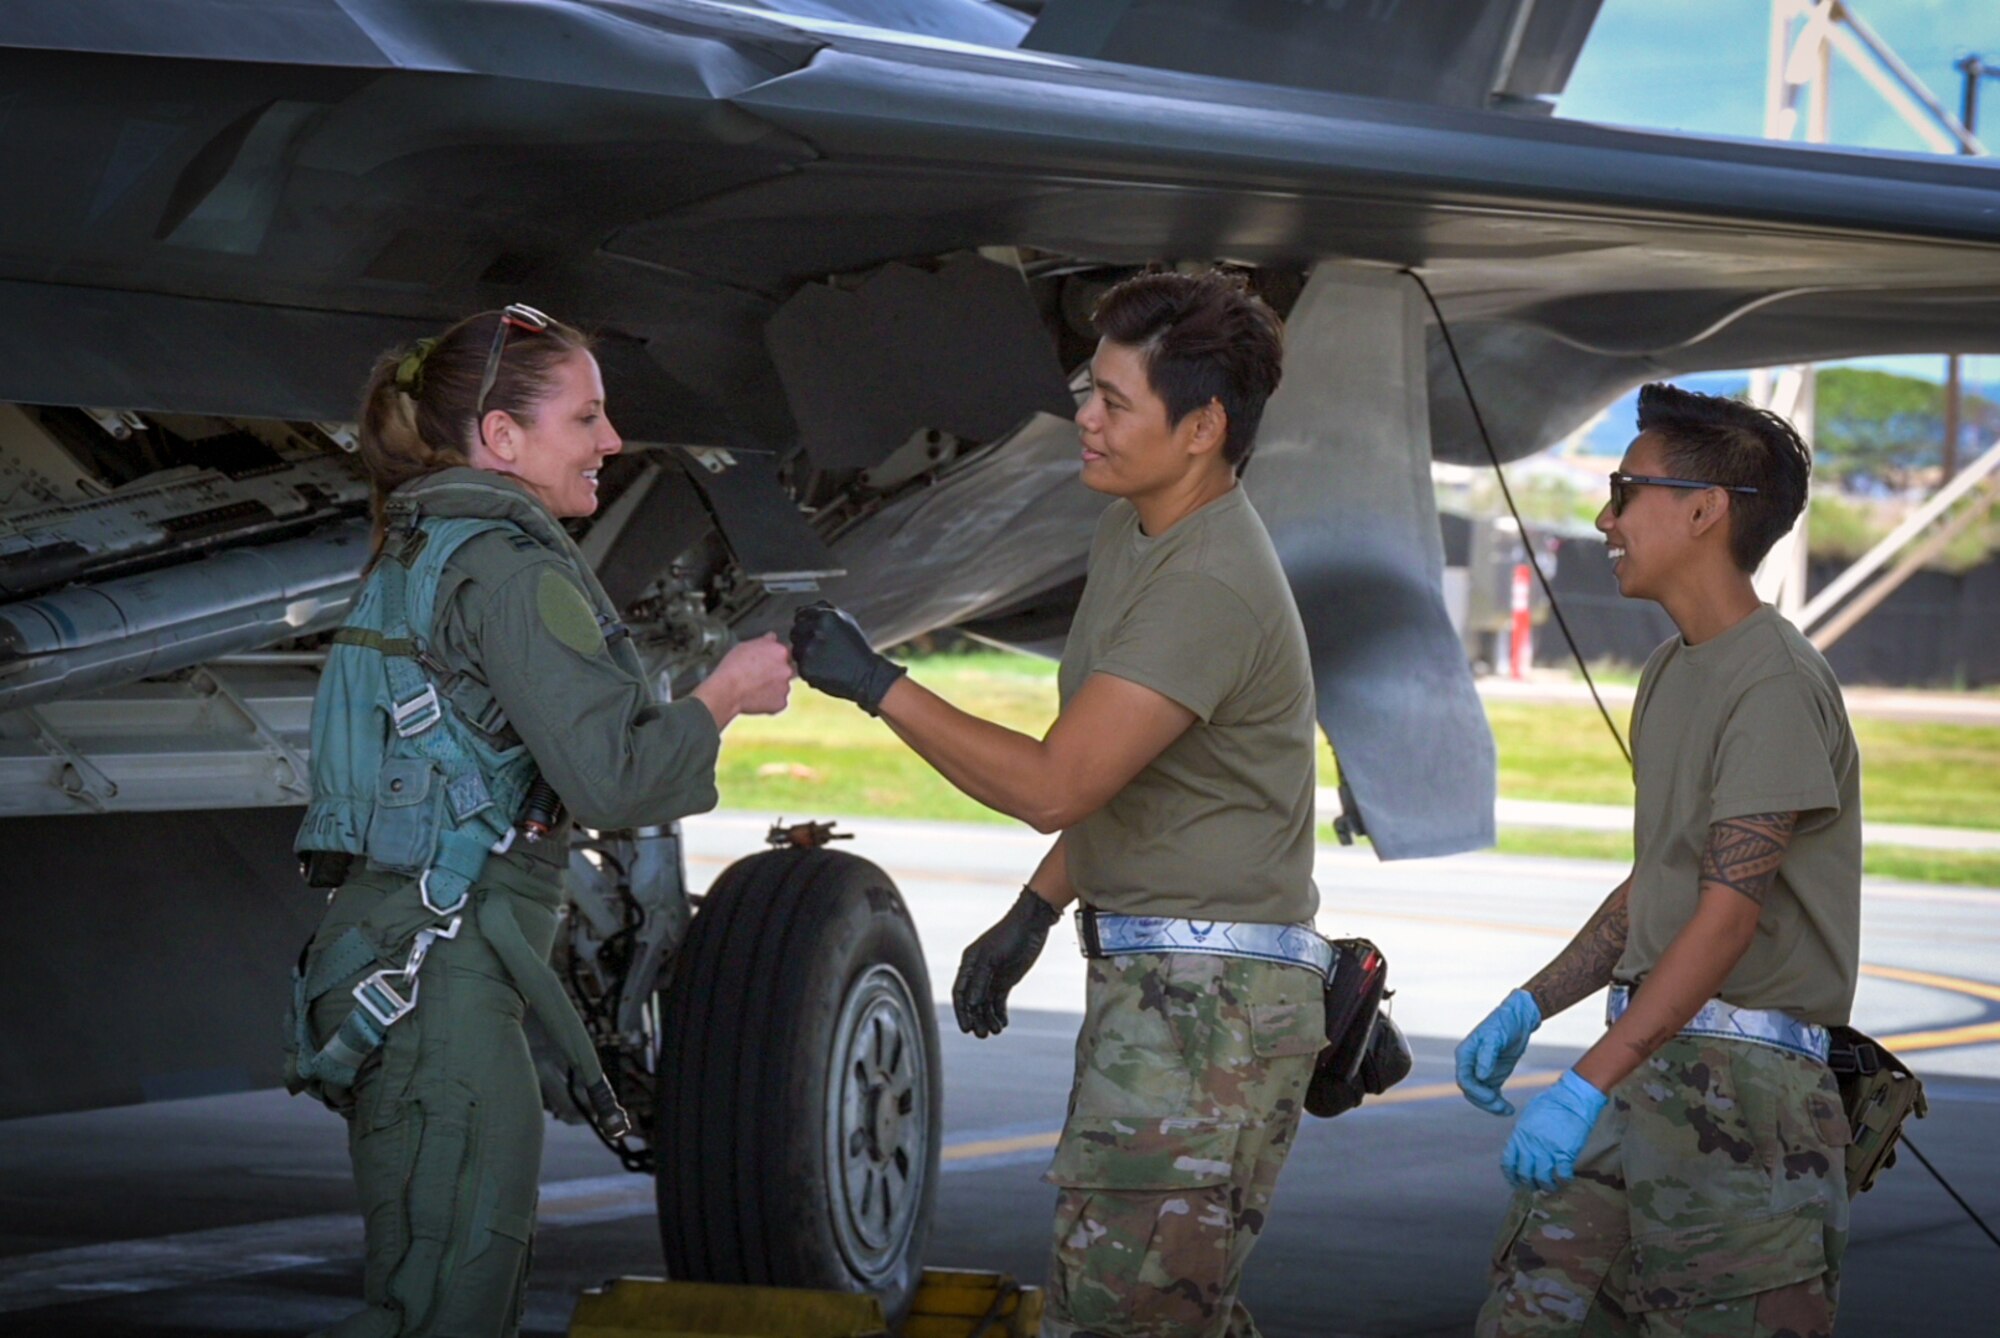 U.S. Air Force Capt. Nichole Bahlman, 199th Fighter Squadron F-22 Raptor pilot, is greeted by her female crew chiefs prior to take-off during a routine training mission Joint Base Pearl Harbor-Hickam, Hawaii, Mar 16, 2023. Capt. Bahlman is the first female fighter pilot in the Hawaii Air National Guard. (U.S. Air National Guard photo by Master Sgt. Mysti Bicoy)